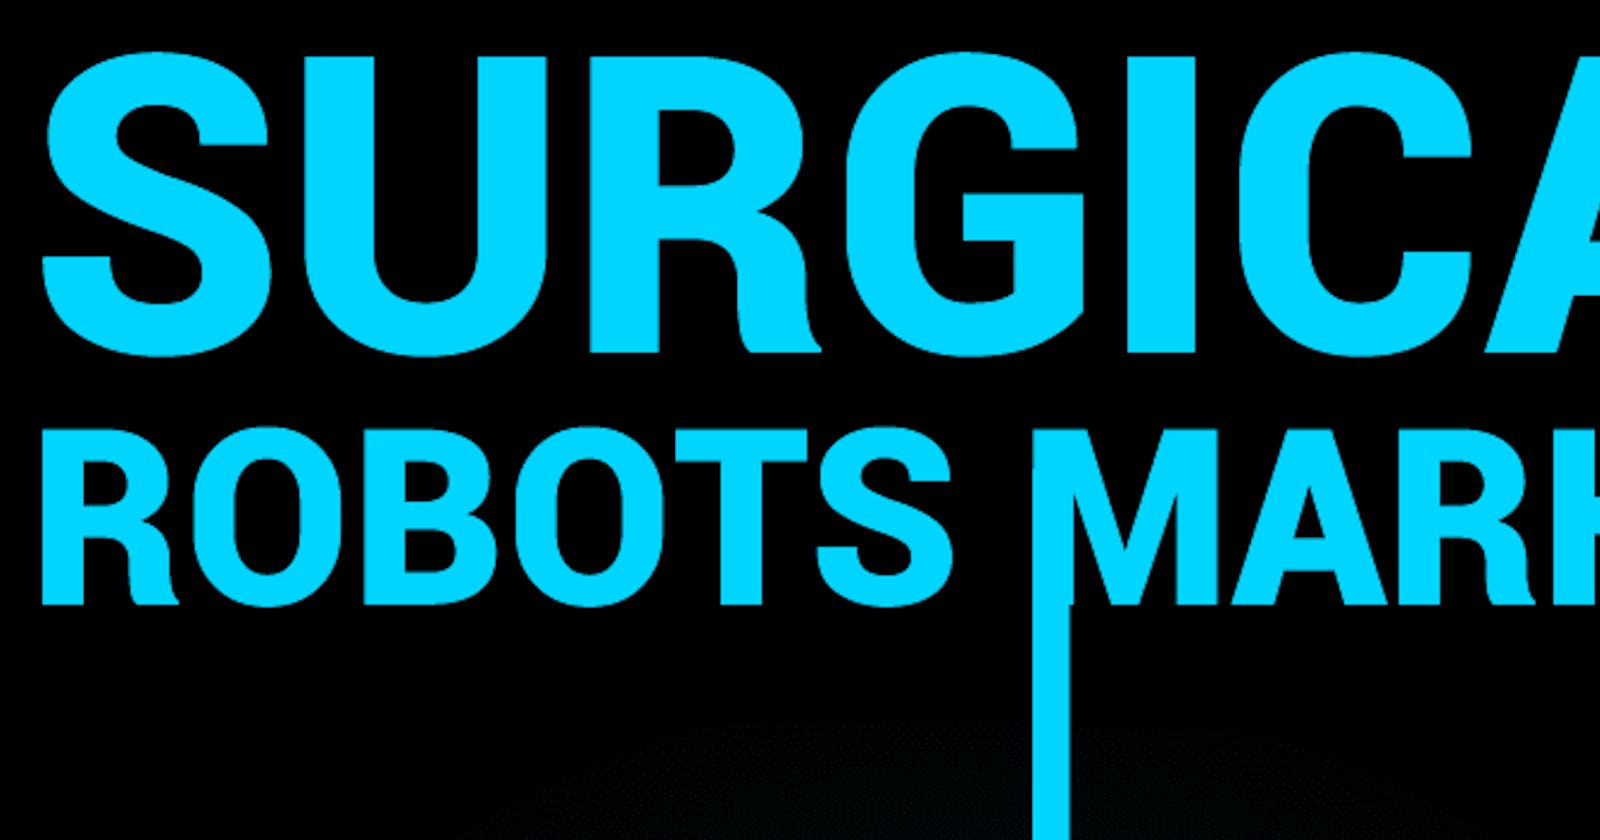 Surgical Robots Market: Growing at a CAGR of 21.4%